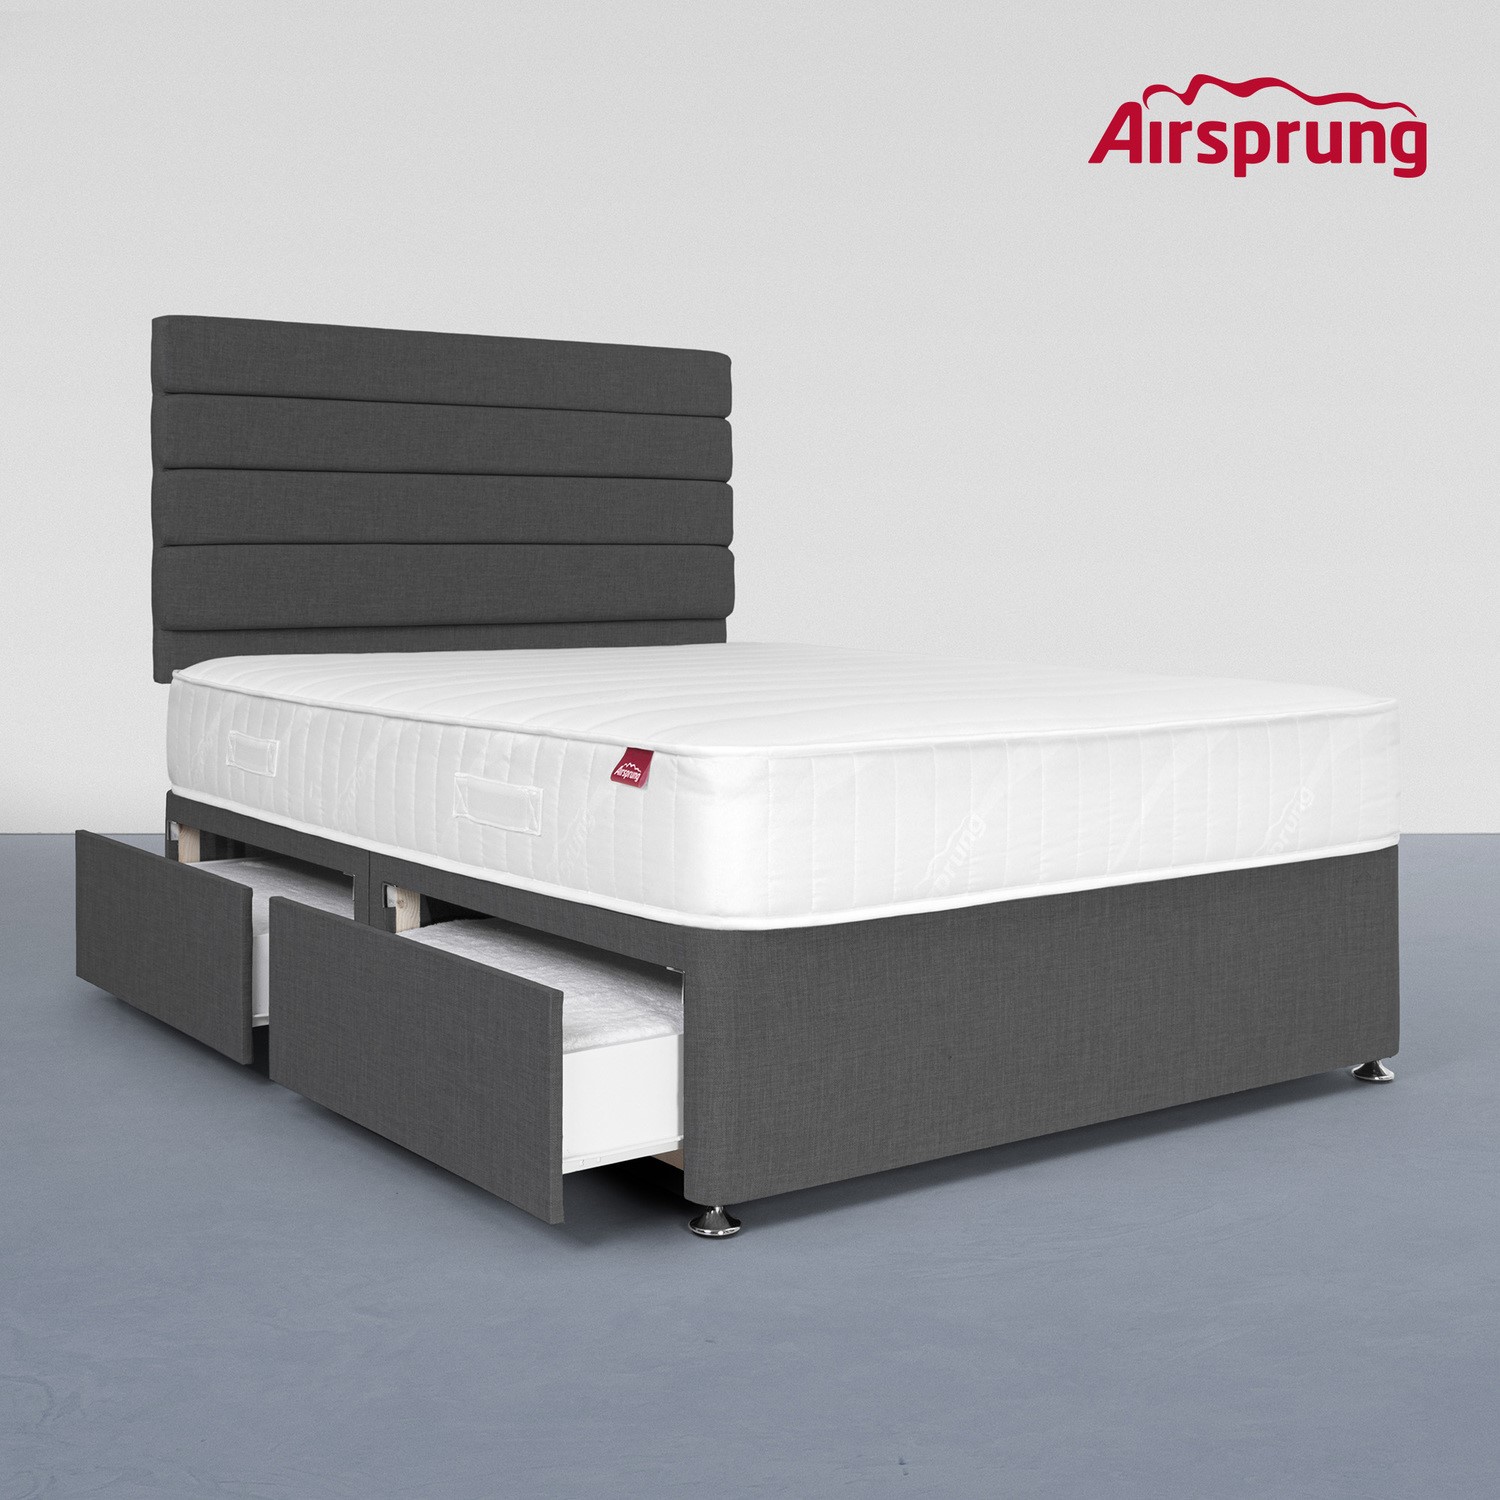 Read more about Airsprung double 4 drawer divan bed with hybrid mattress charcoal